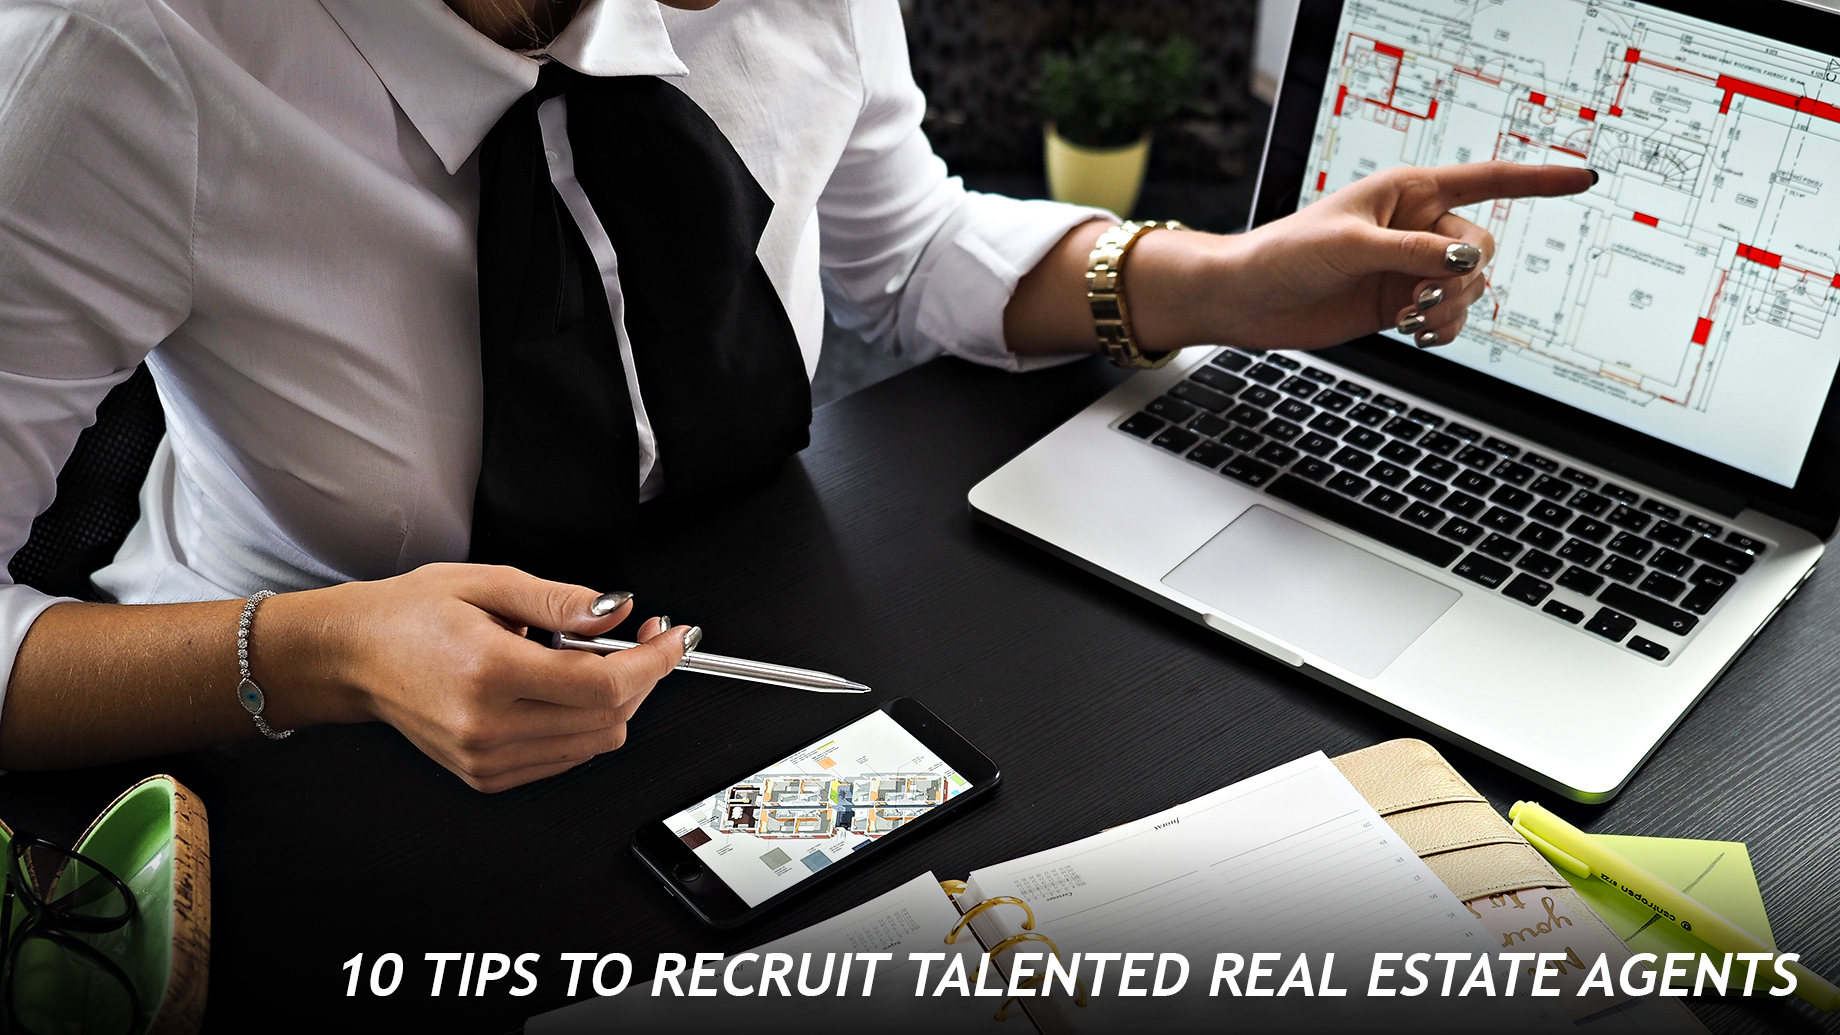 10 Tips To Recruit Talented Real Estate Agents